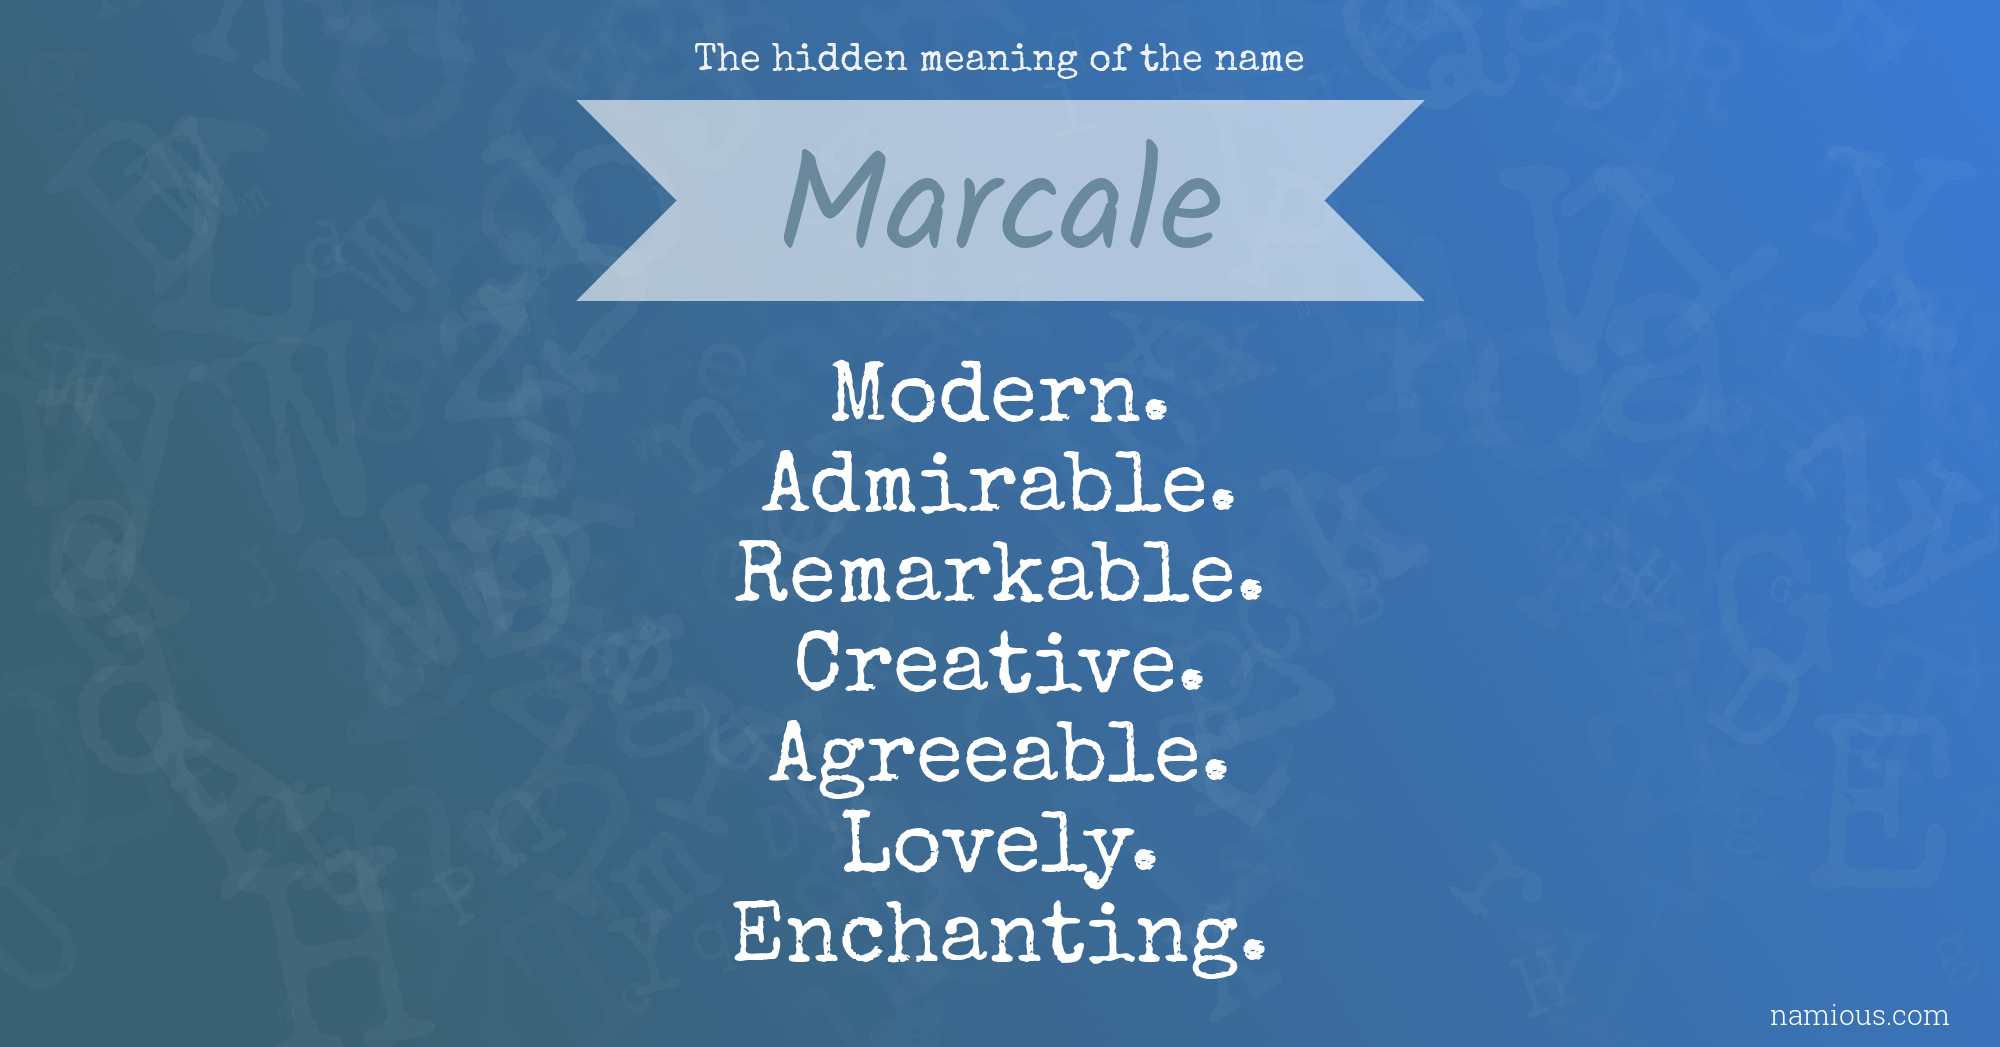 The hidden meaning of the name Marcale